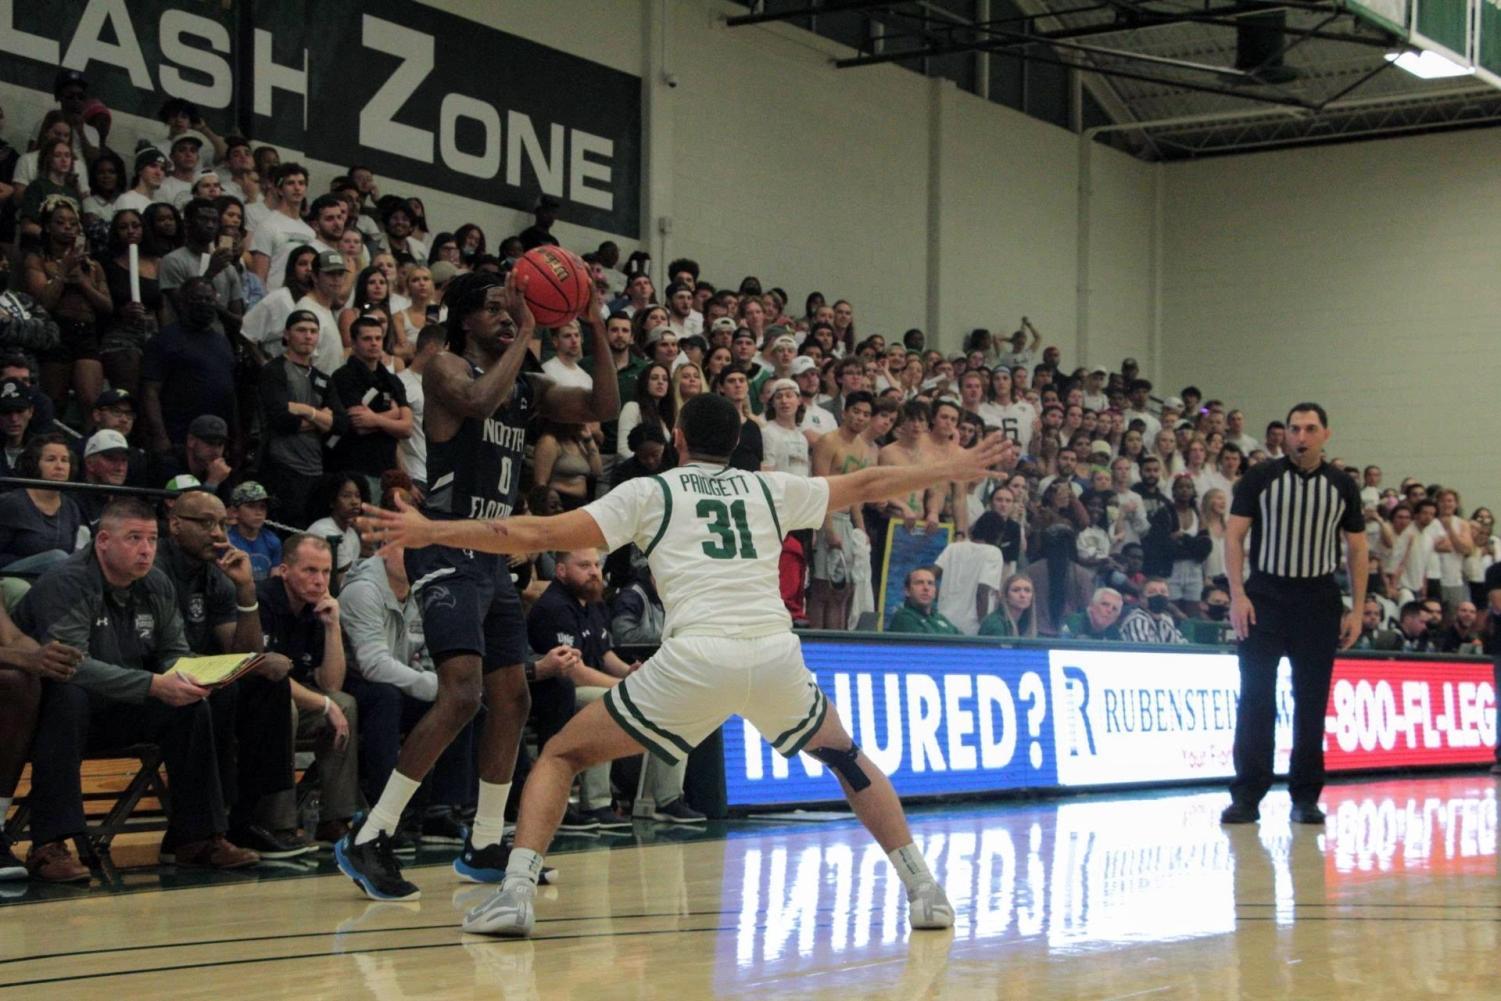 JU player defends shot from UNF player